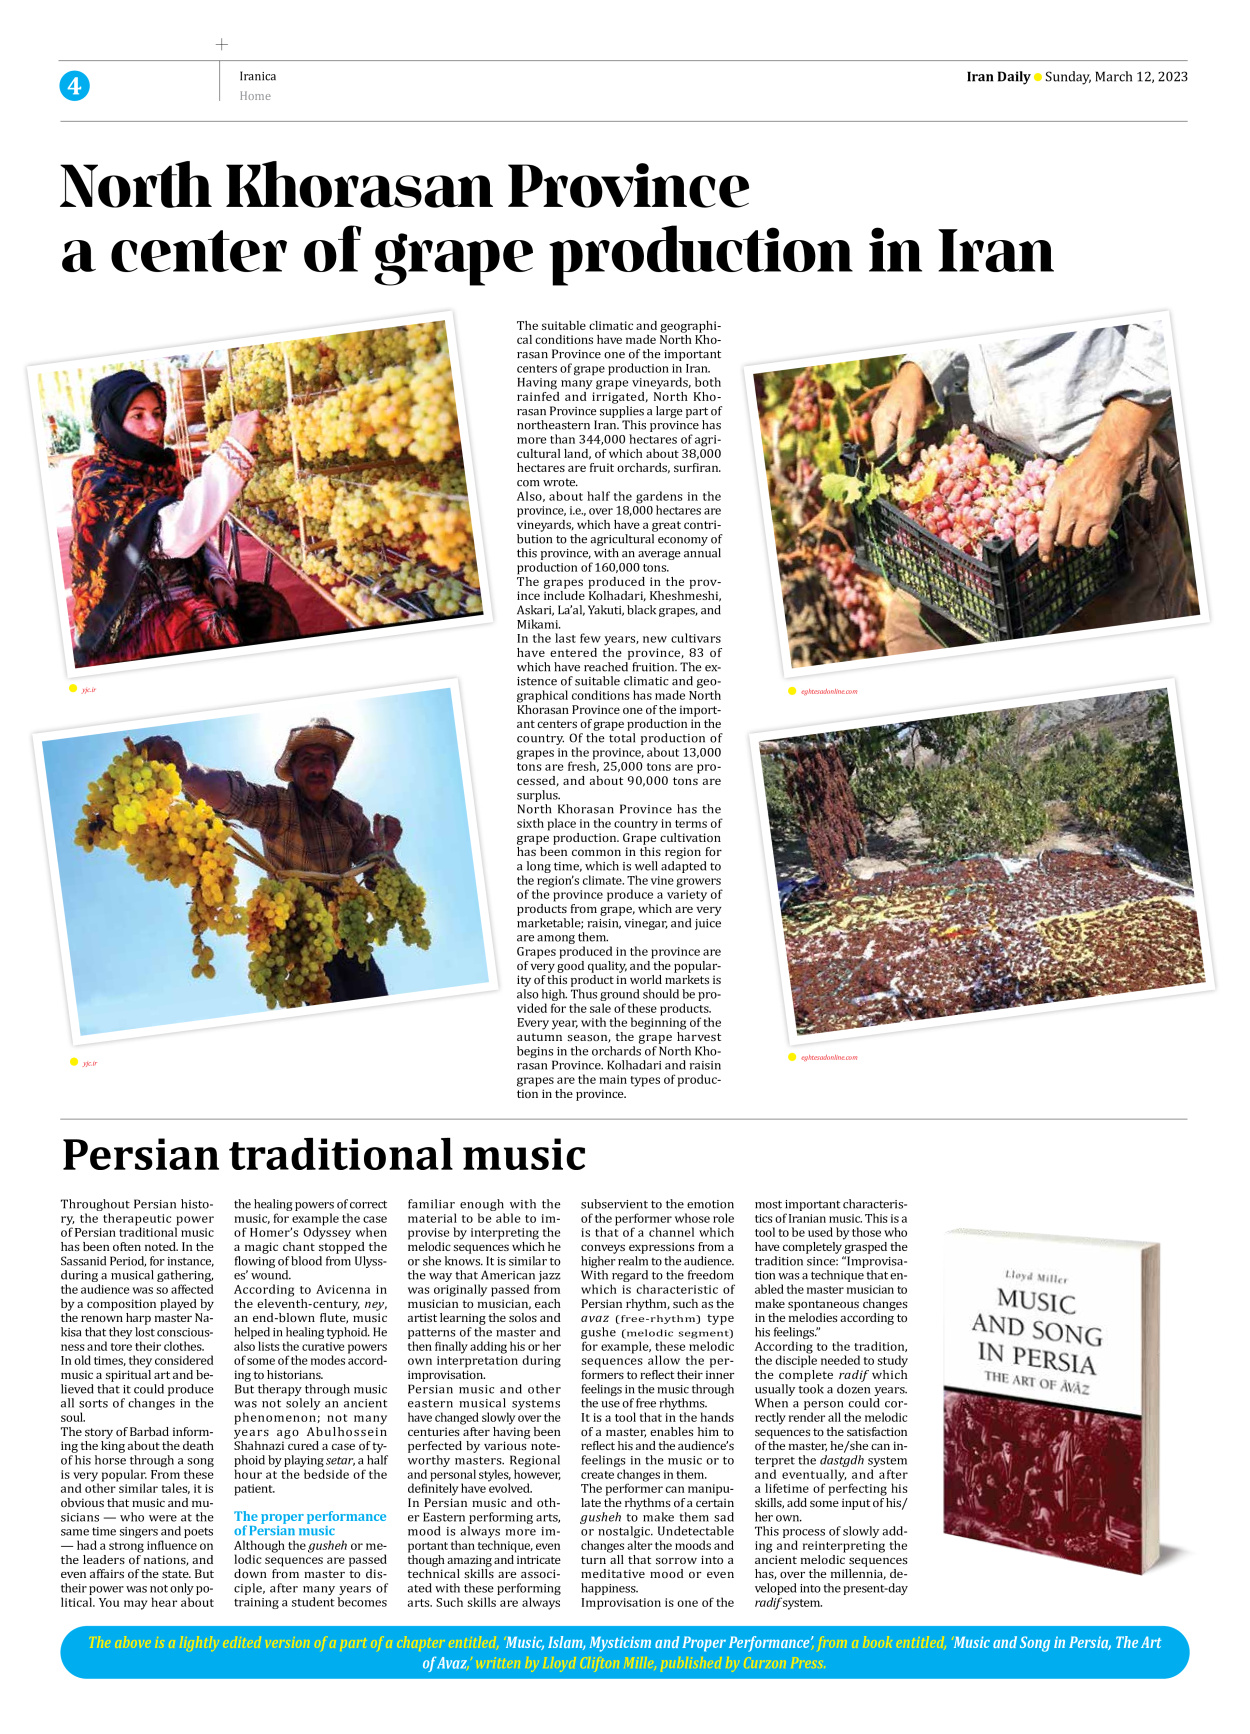 Iran Daily - Number Seven Thousand Two Hundred and Fifty Five - 12 March 2023 - Page 4